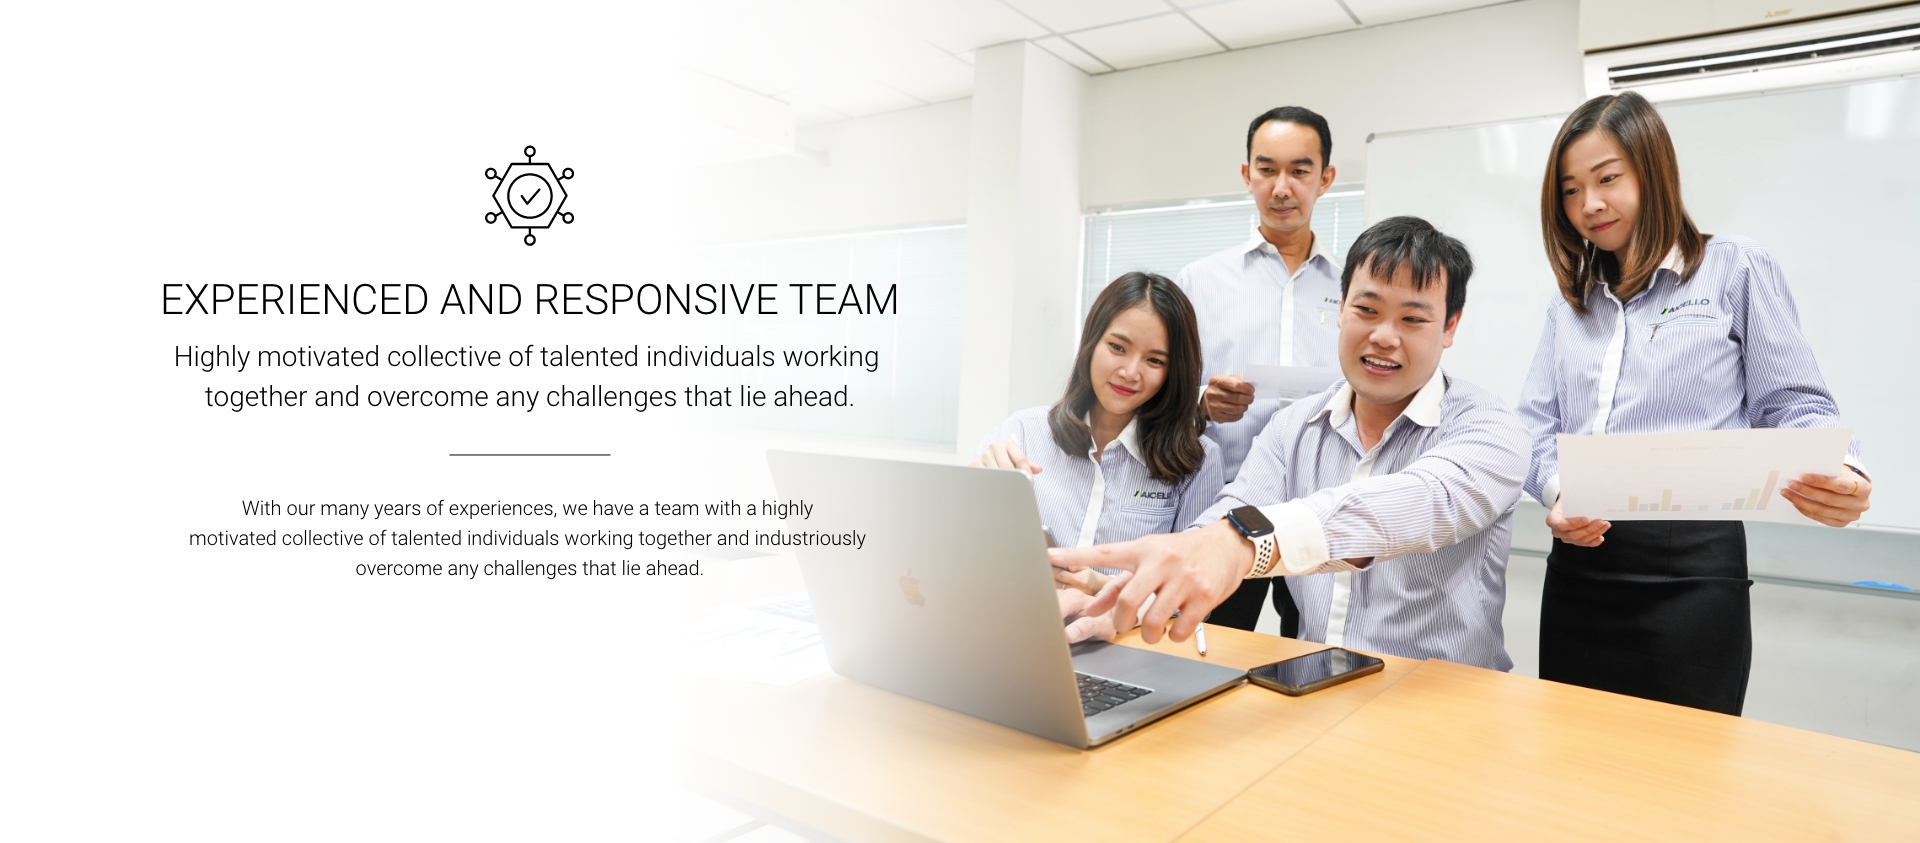 EXPERIENCED AND RESPONSIVE TEAM